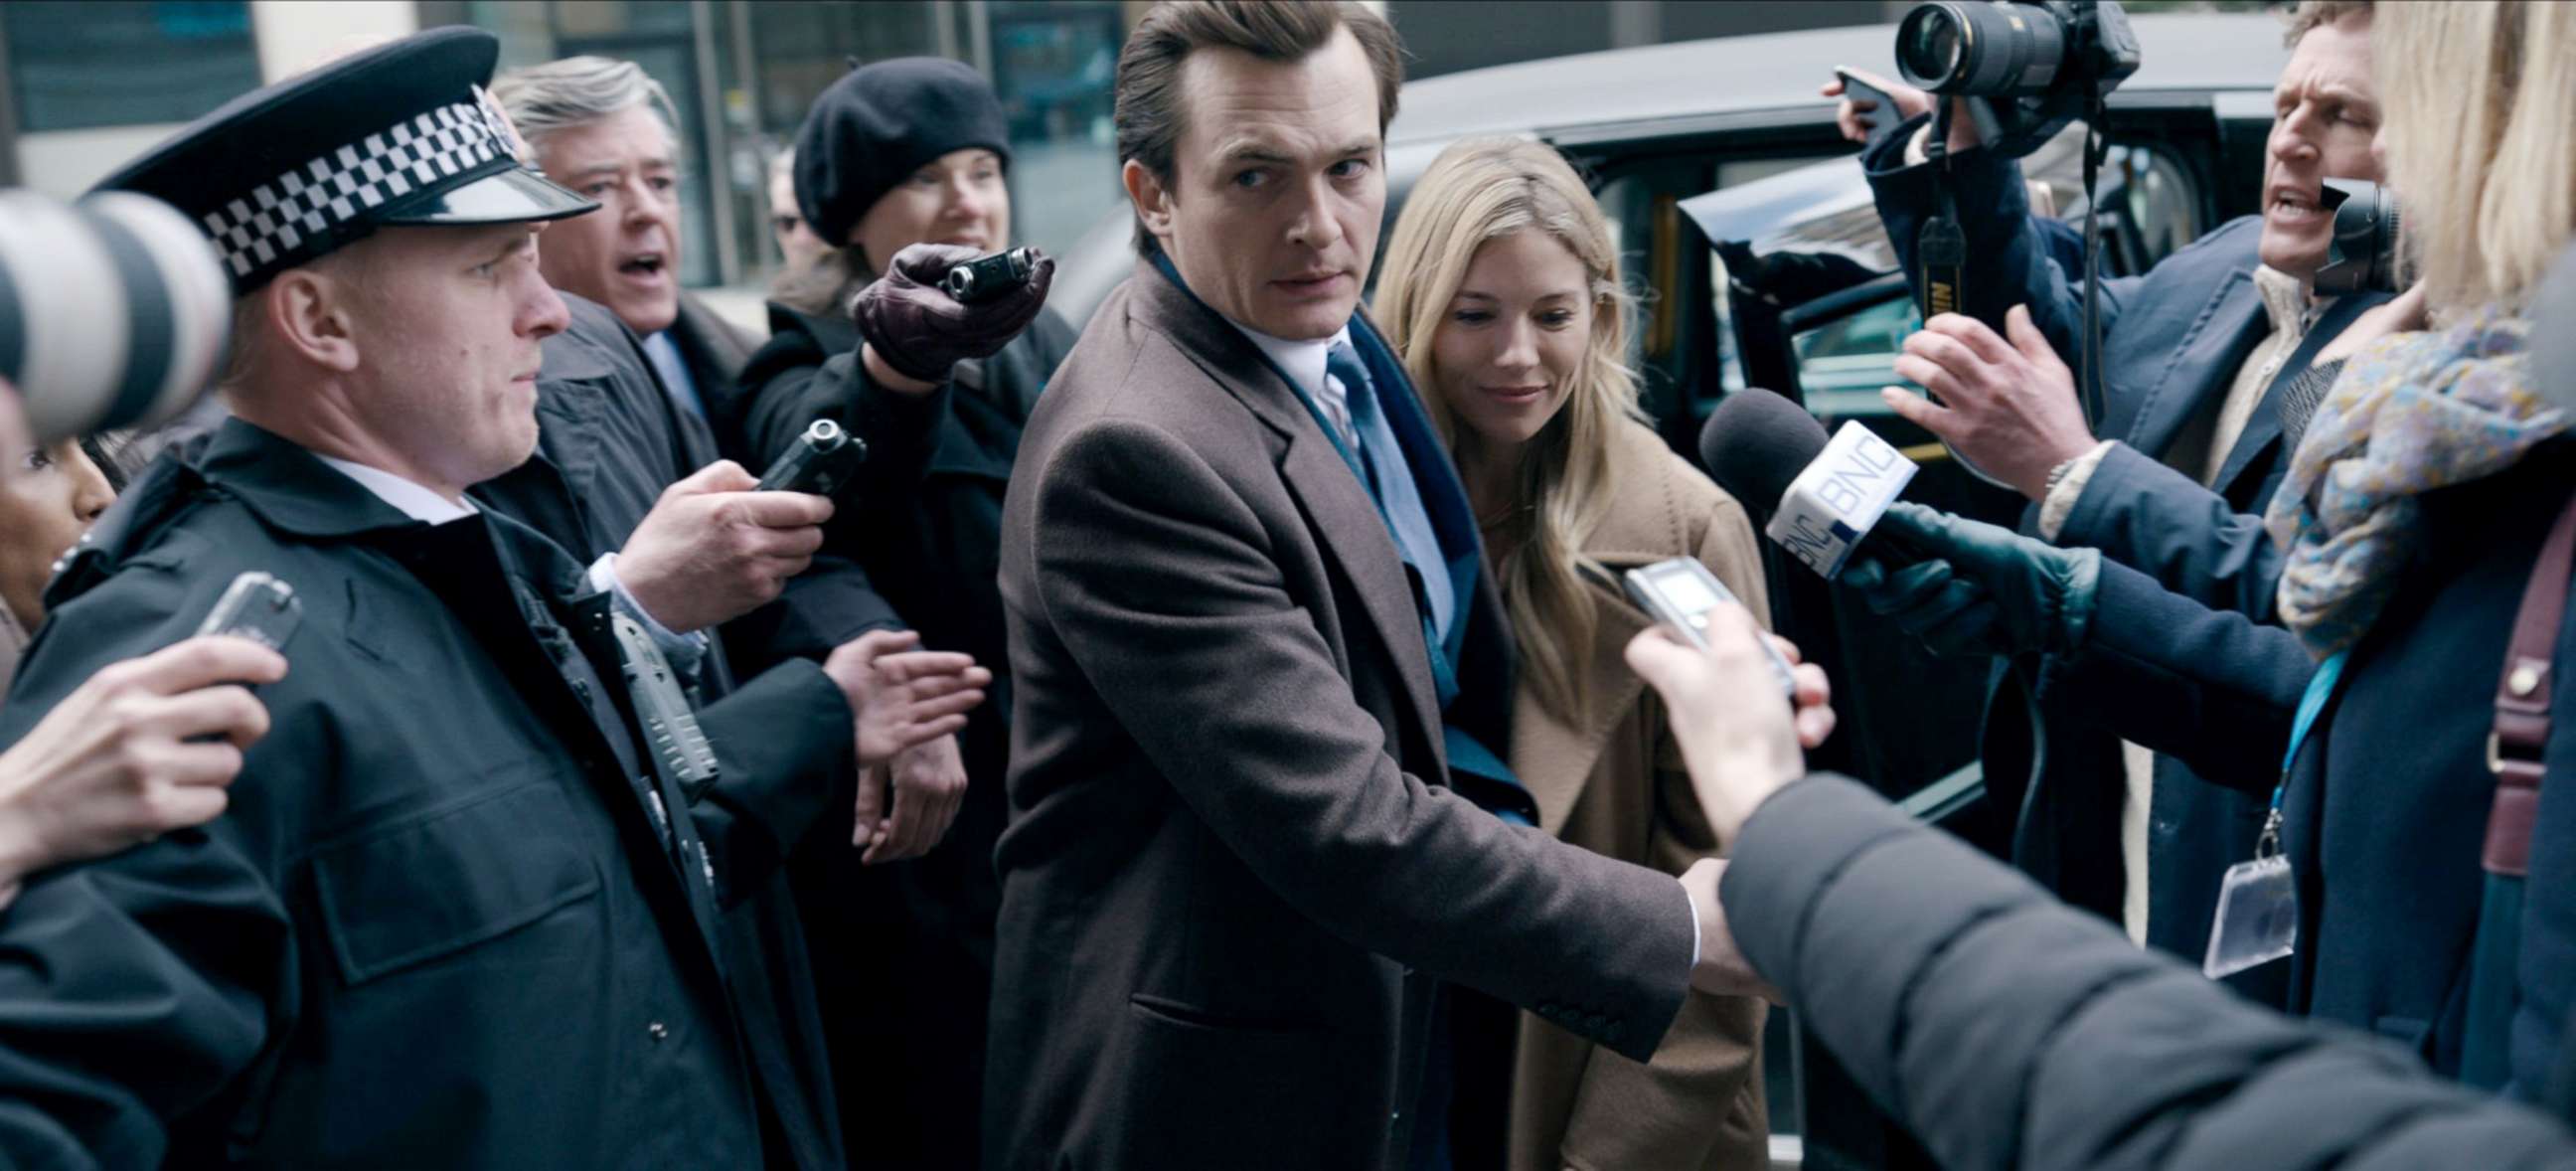 PHOTO: Sienna Miller and Rupert Friend appear in Anatomy of a Scandal.